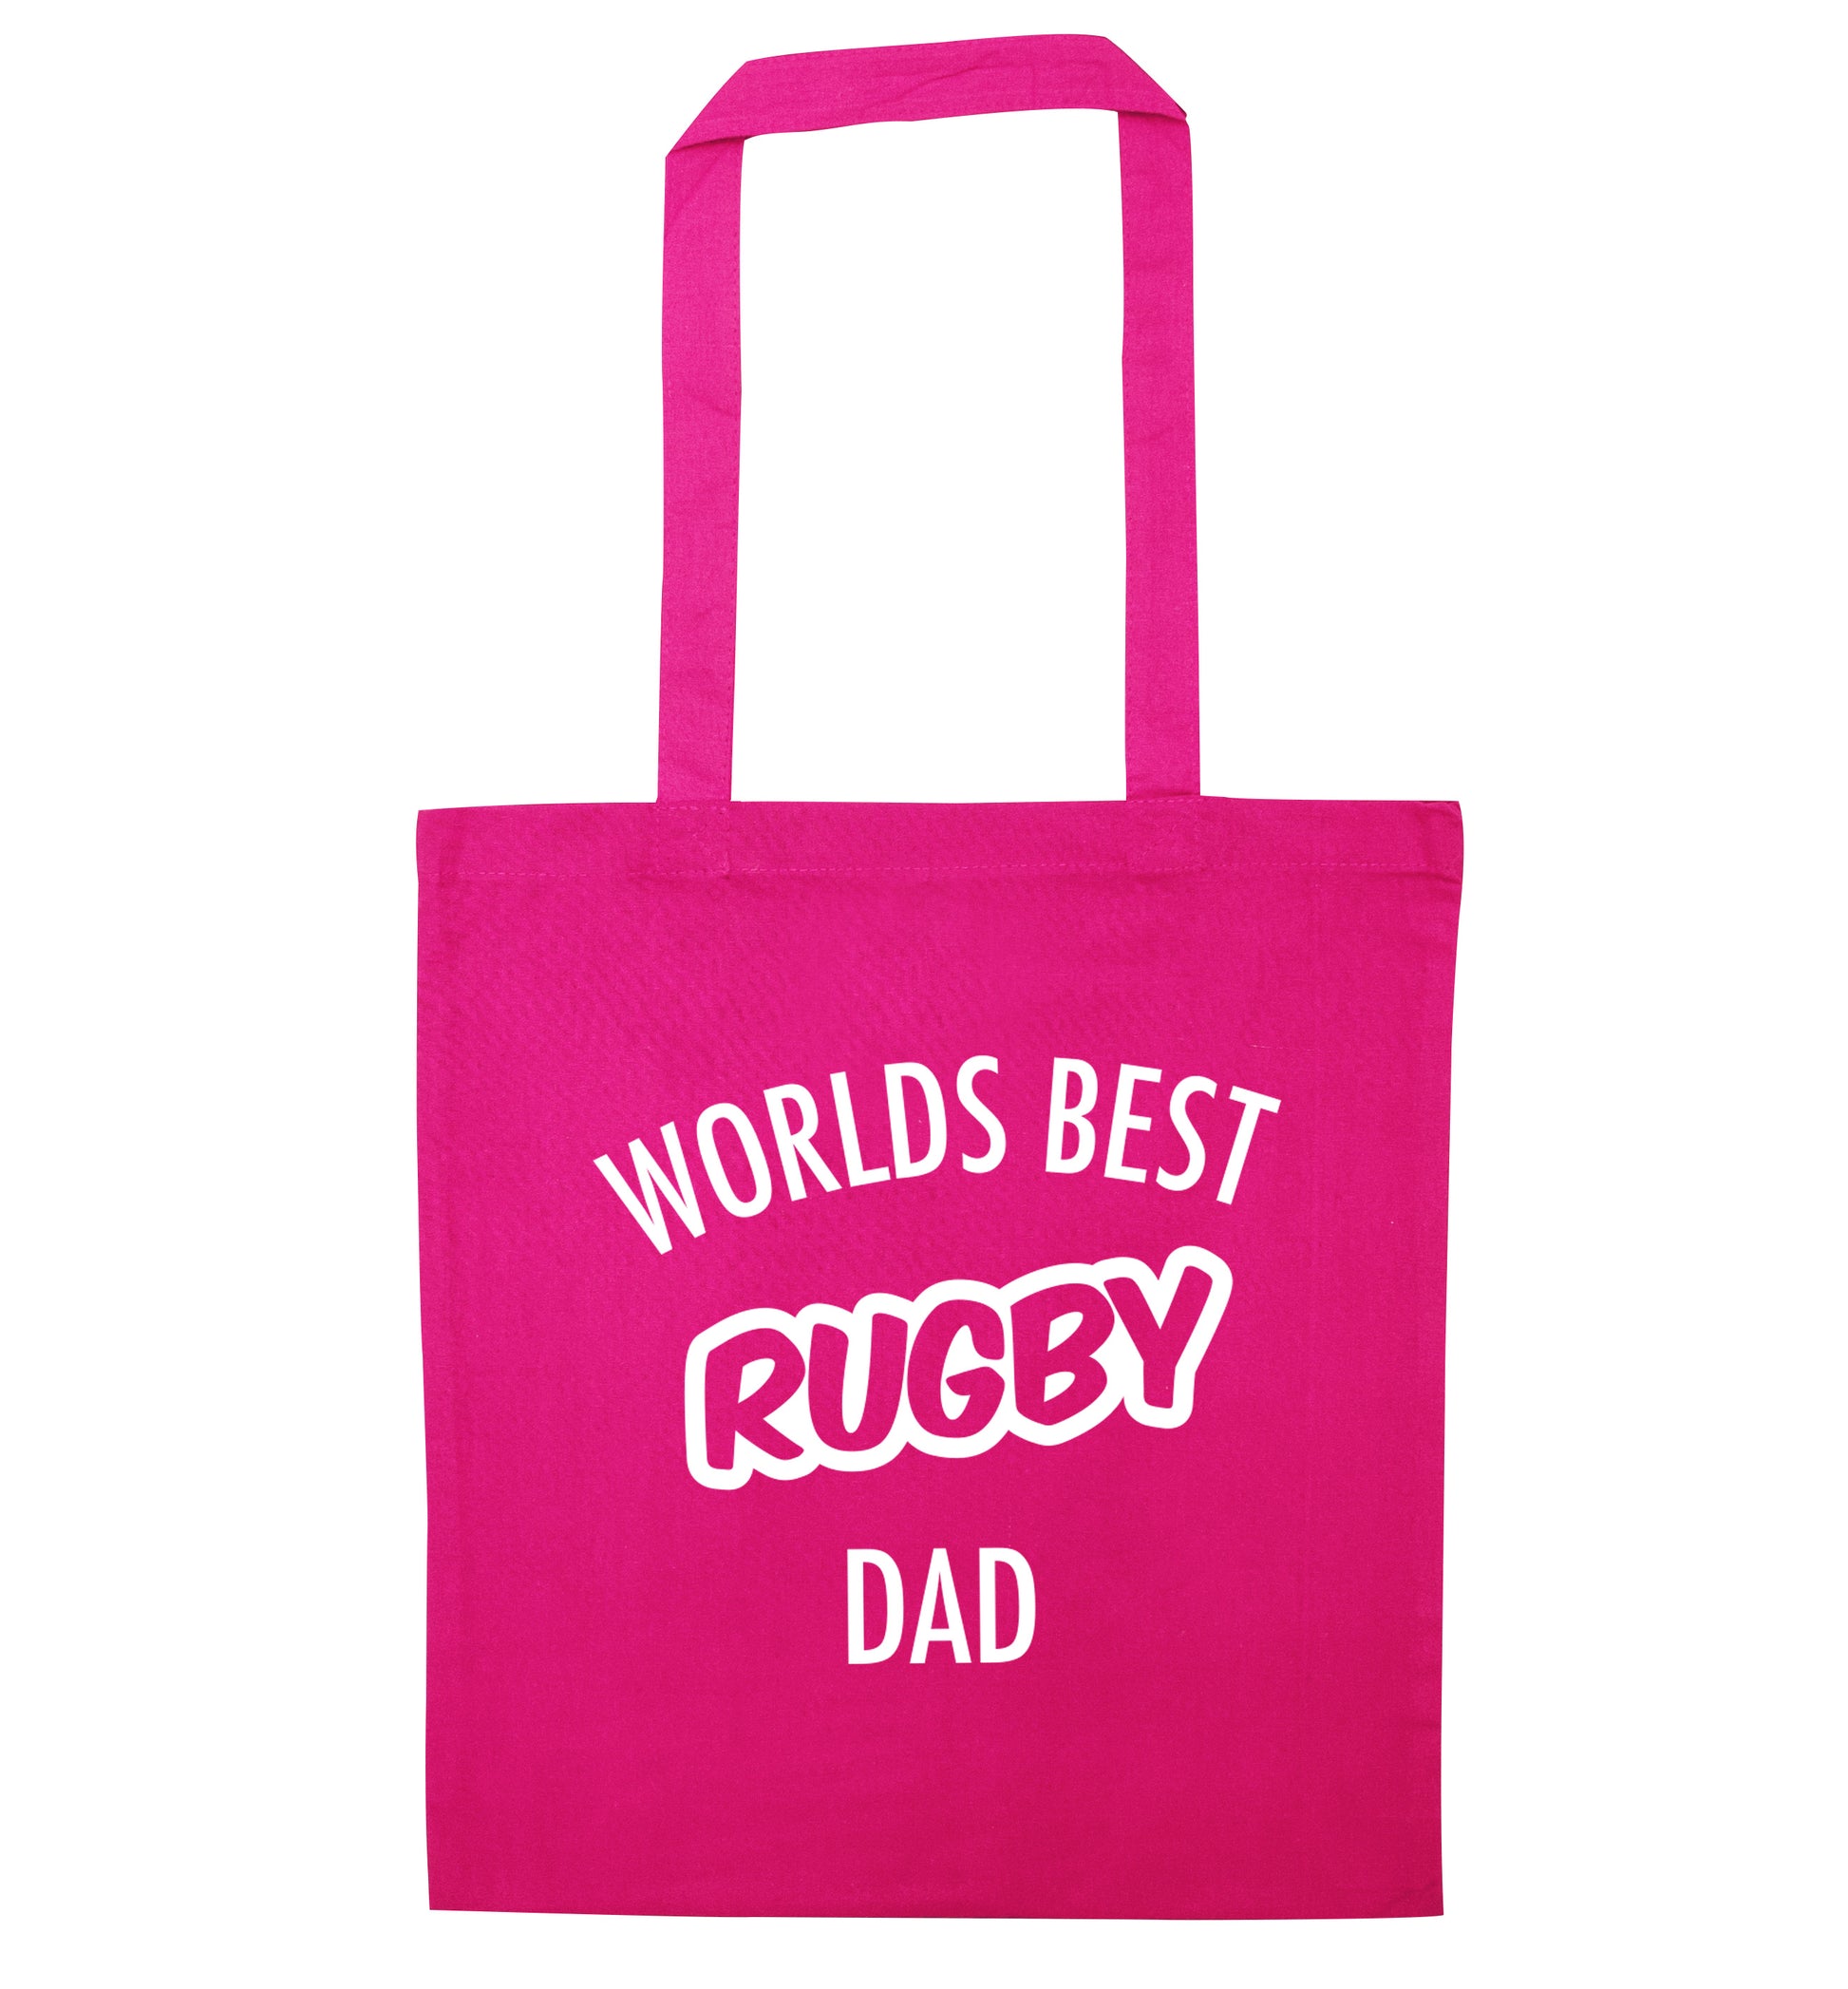 Worlds best rugby dad pink tote bag